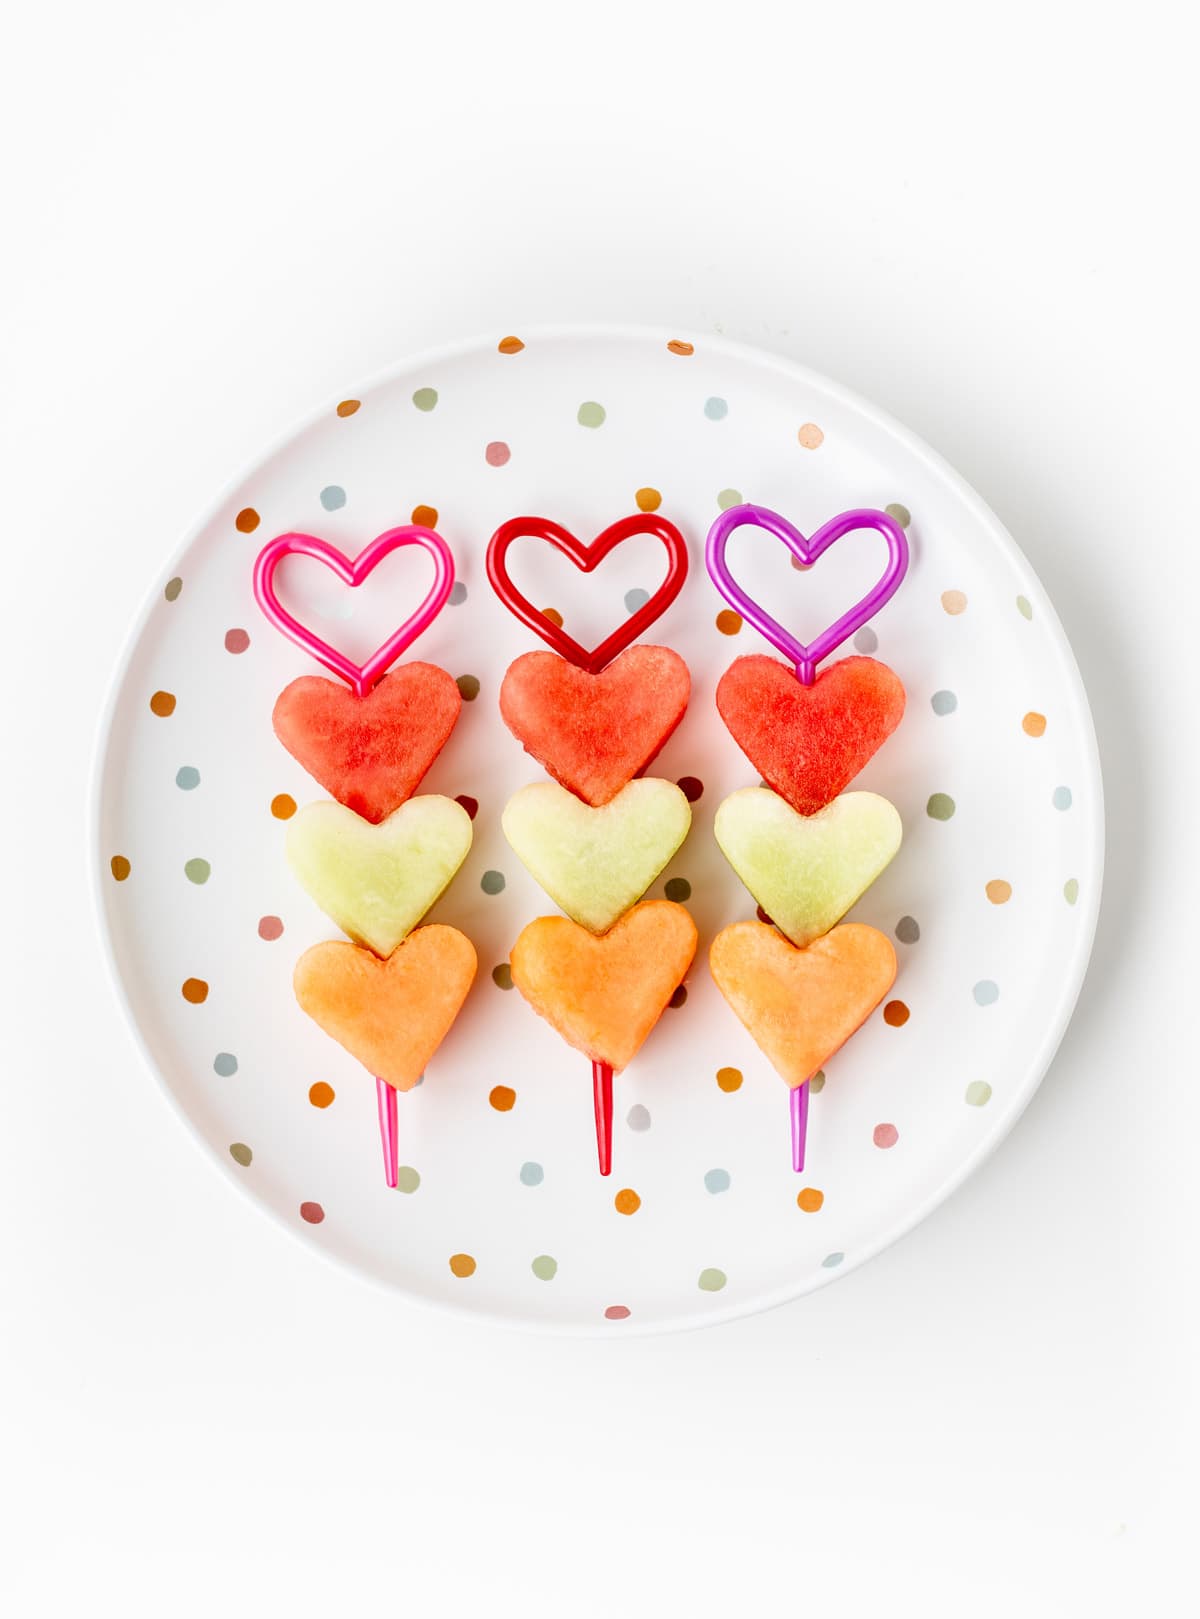 3 heart shaped fruit kabobs lined up on a decorative, polka dotted plate.